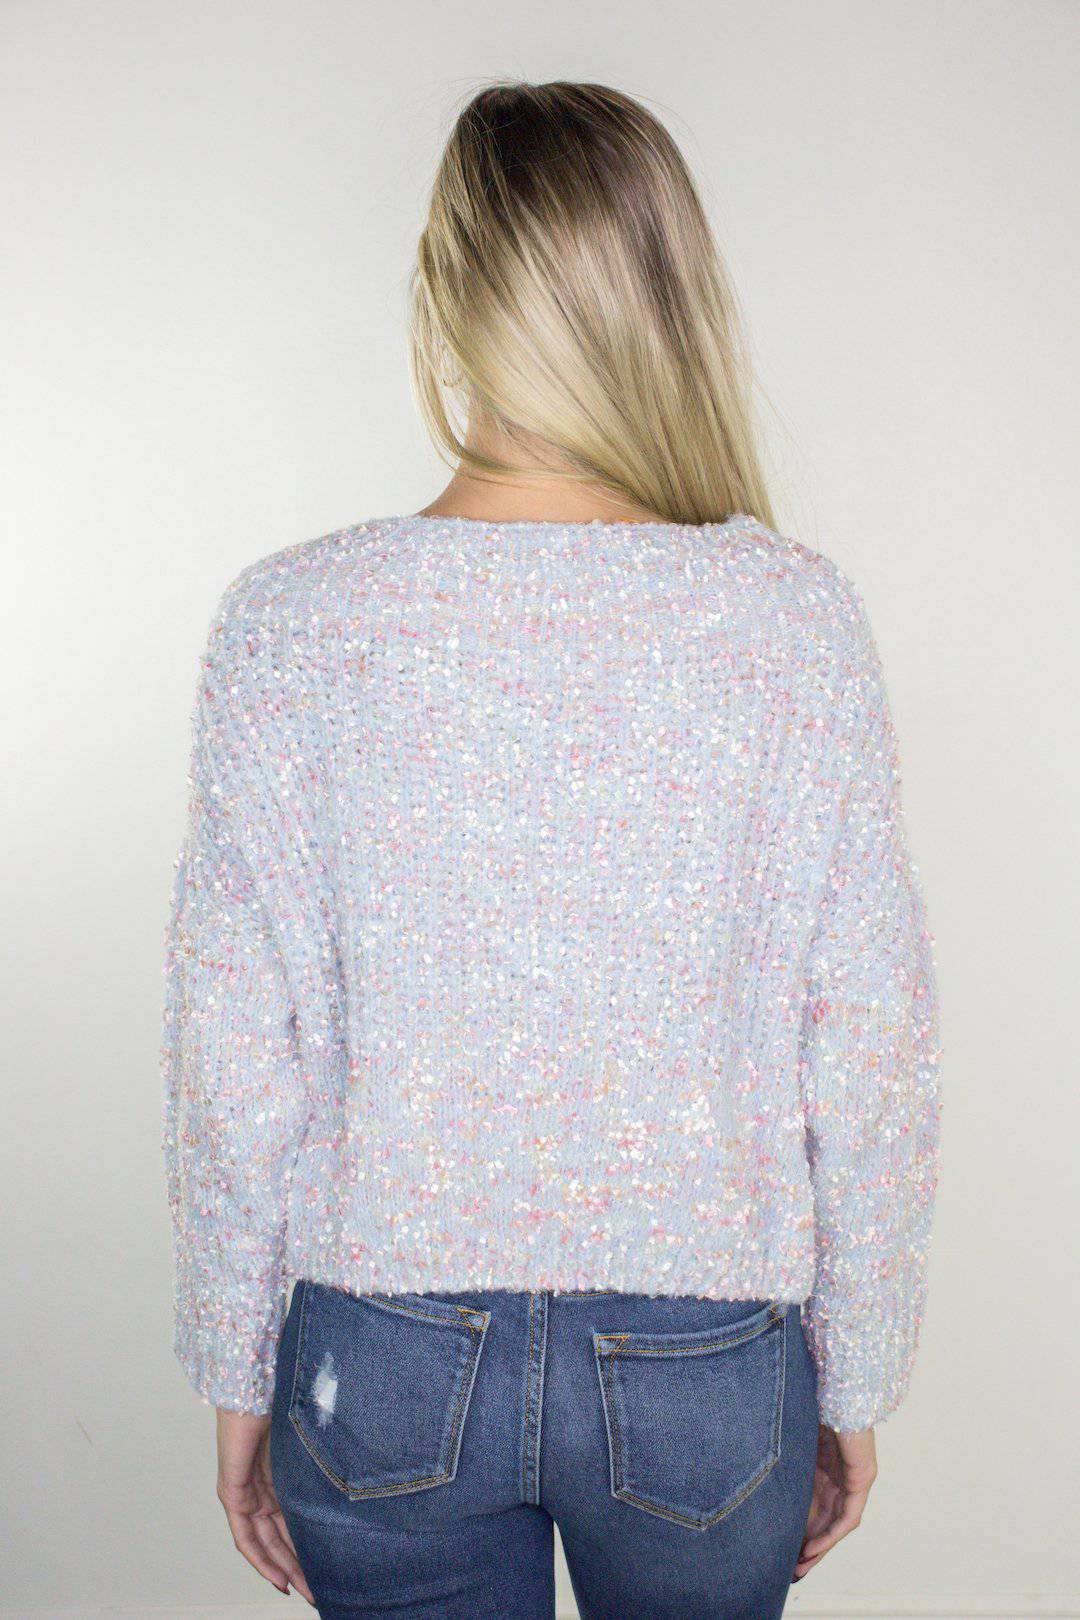 Cotton Candy Land Sweater - Select Trends Boutique